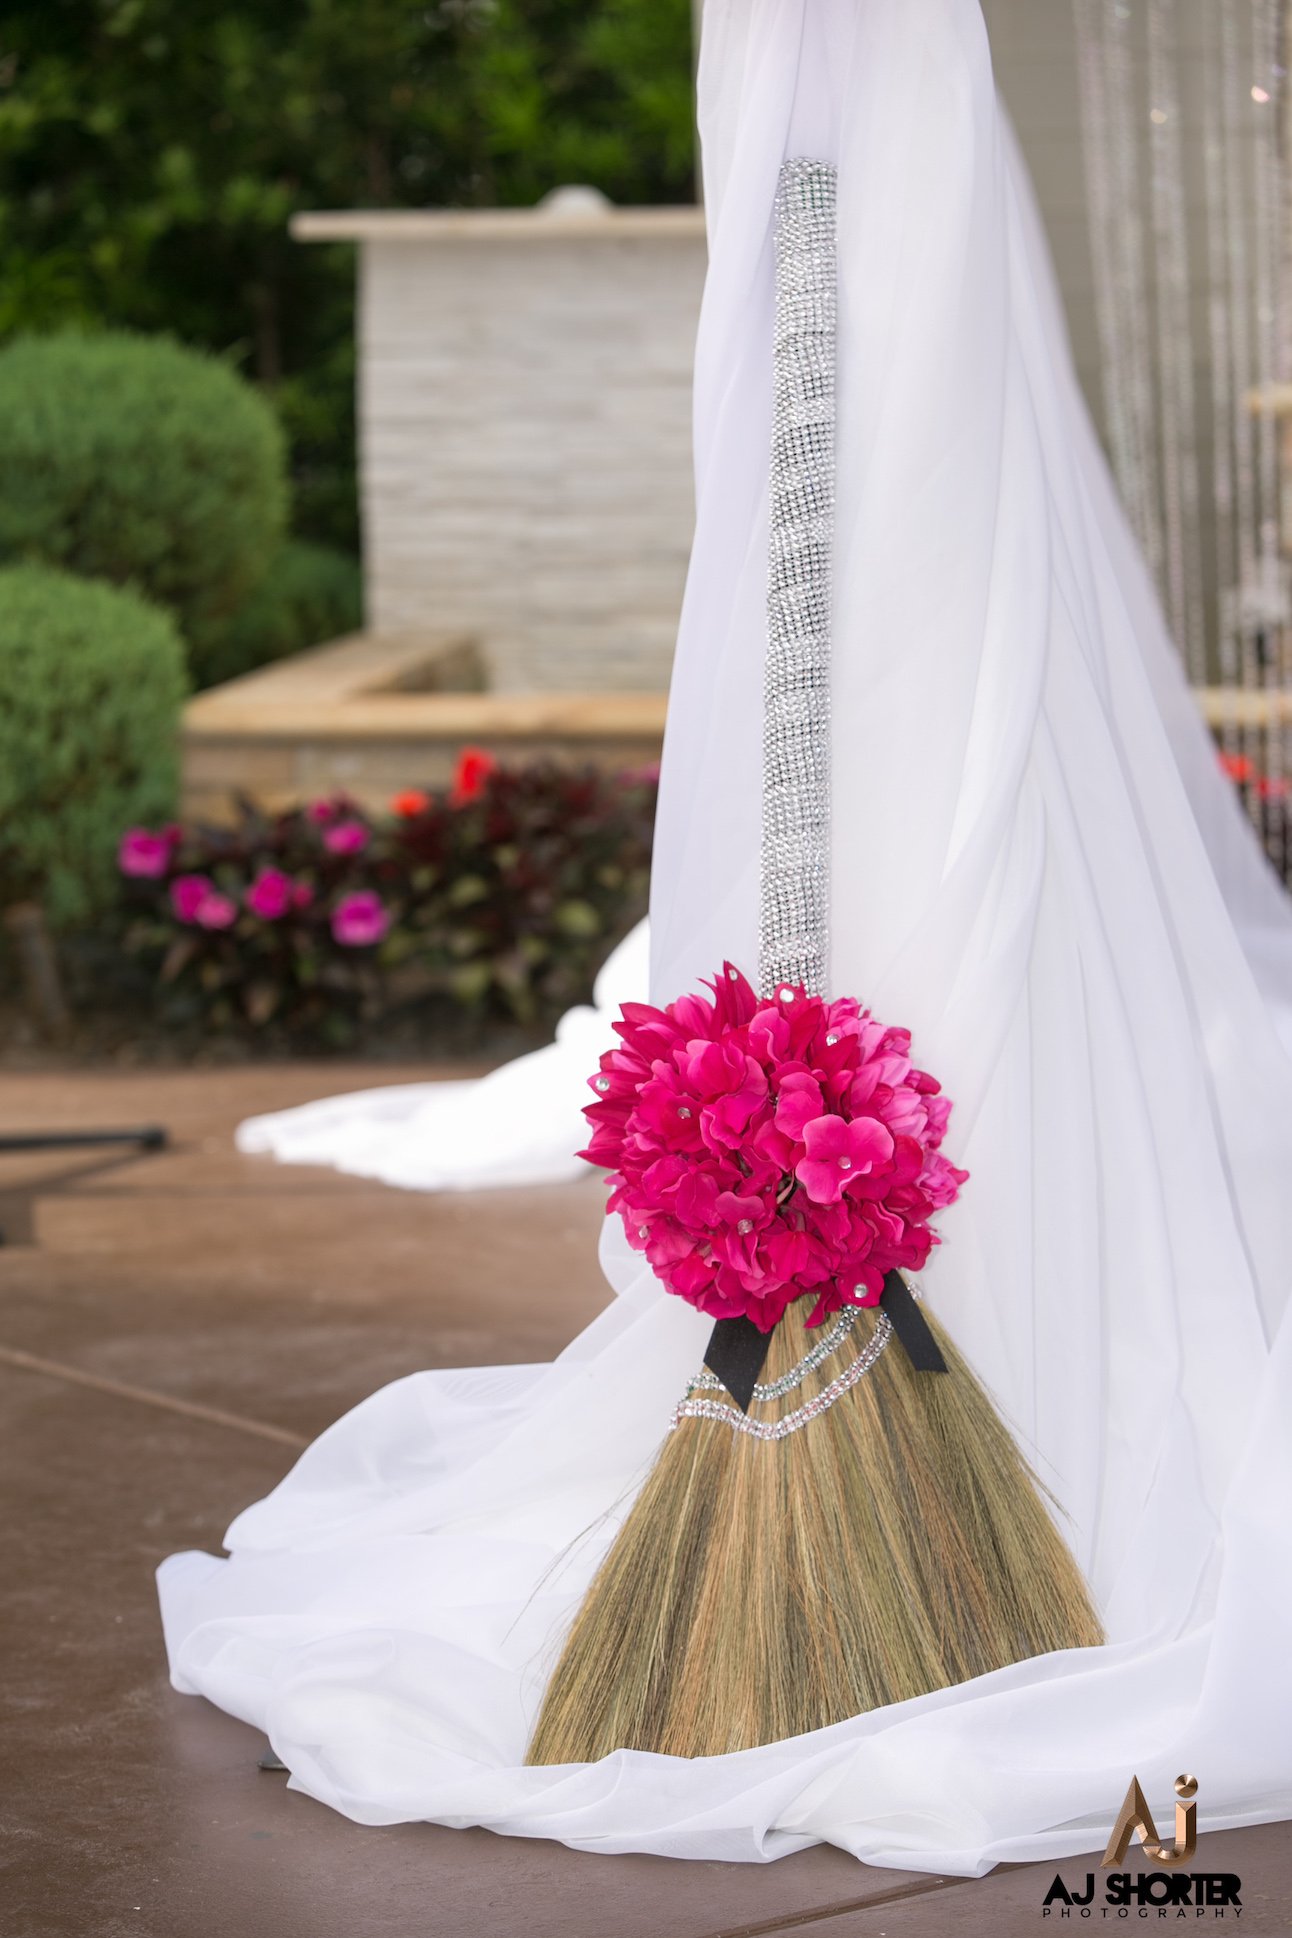 multicultural wedding ideas | jumping the broom